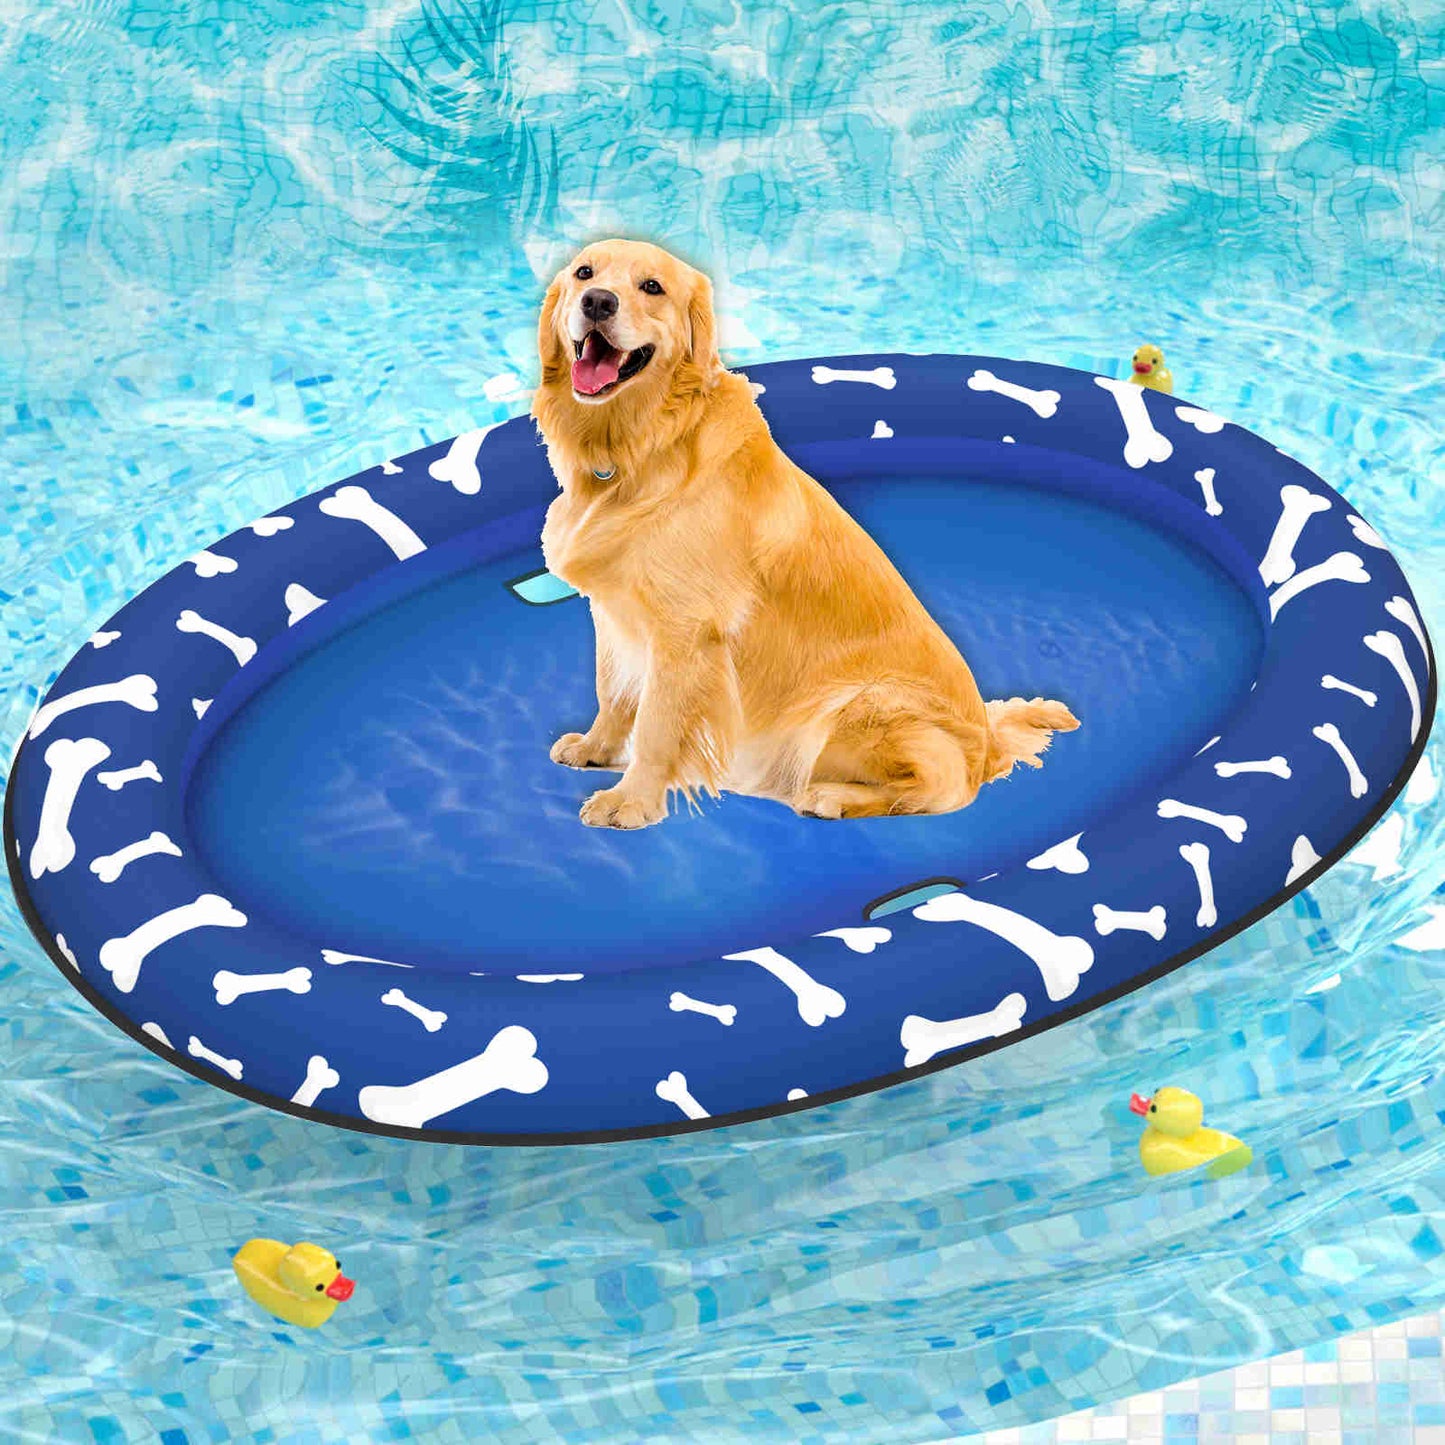 Dog Float Raft - Inflatable Dog Swimming Float for Summer, 1 Pack